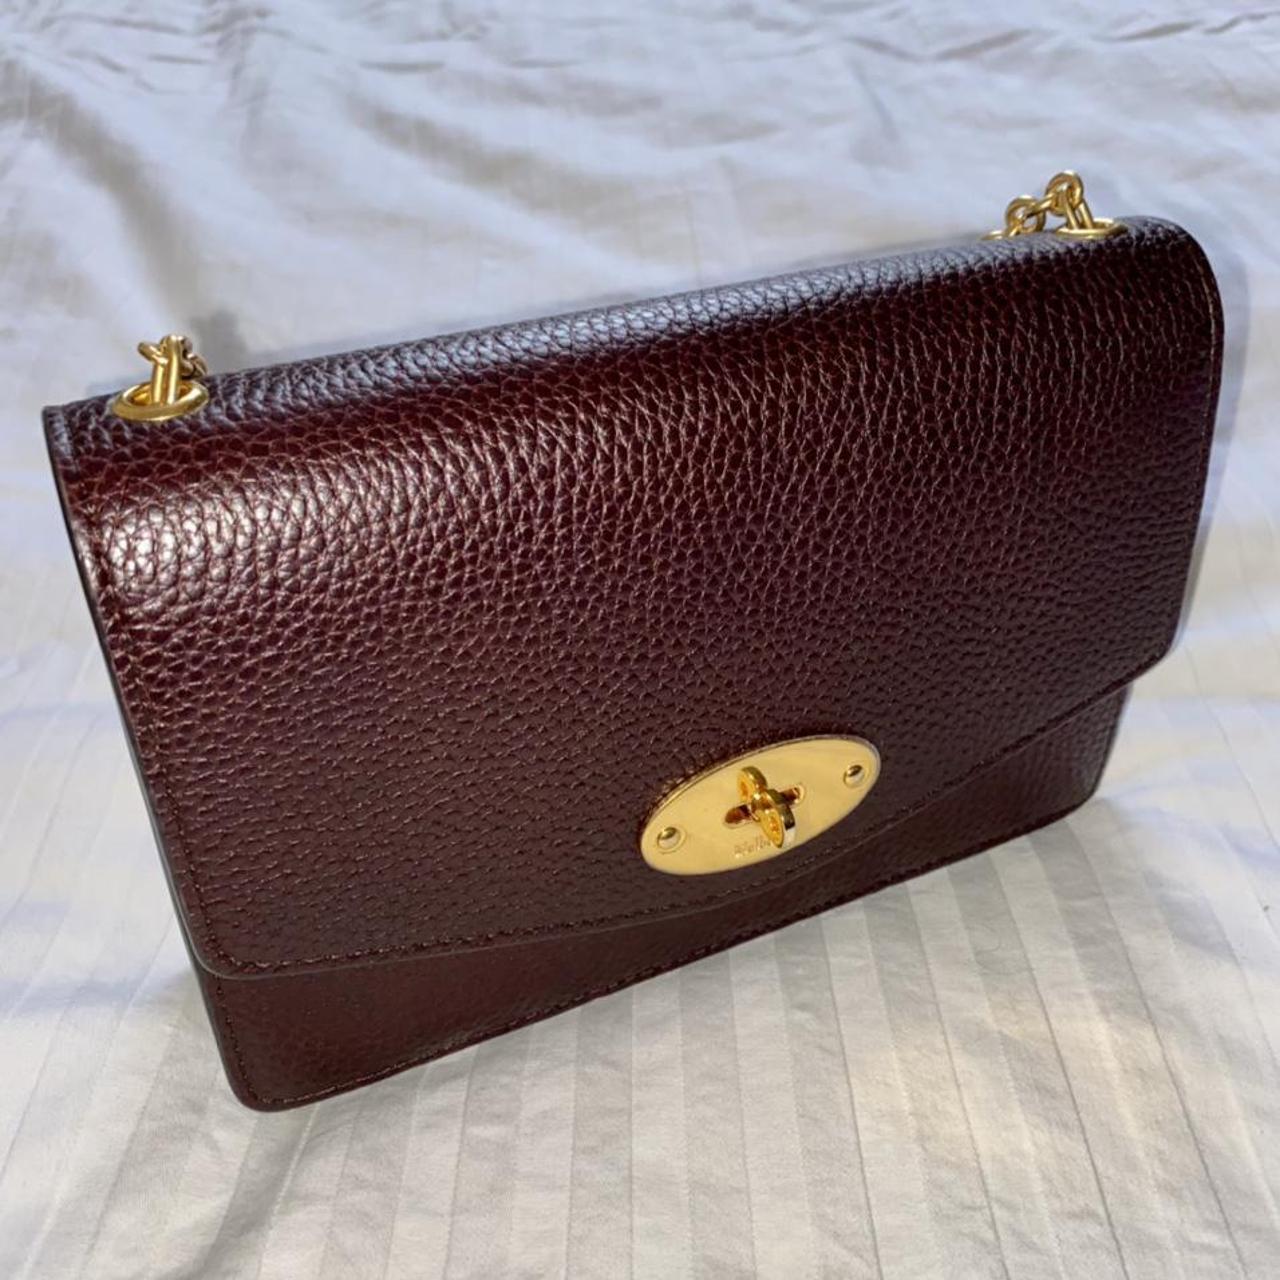 Mulberry | Bags | Mulberry Amberly Satchel In Oxblood | Poshmark